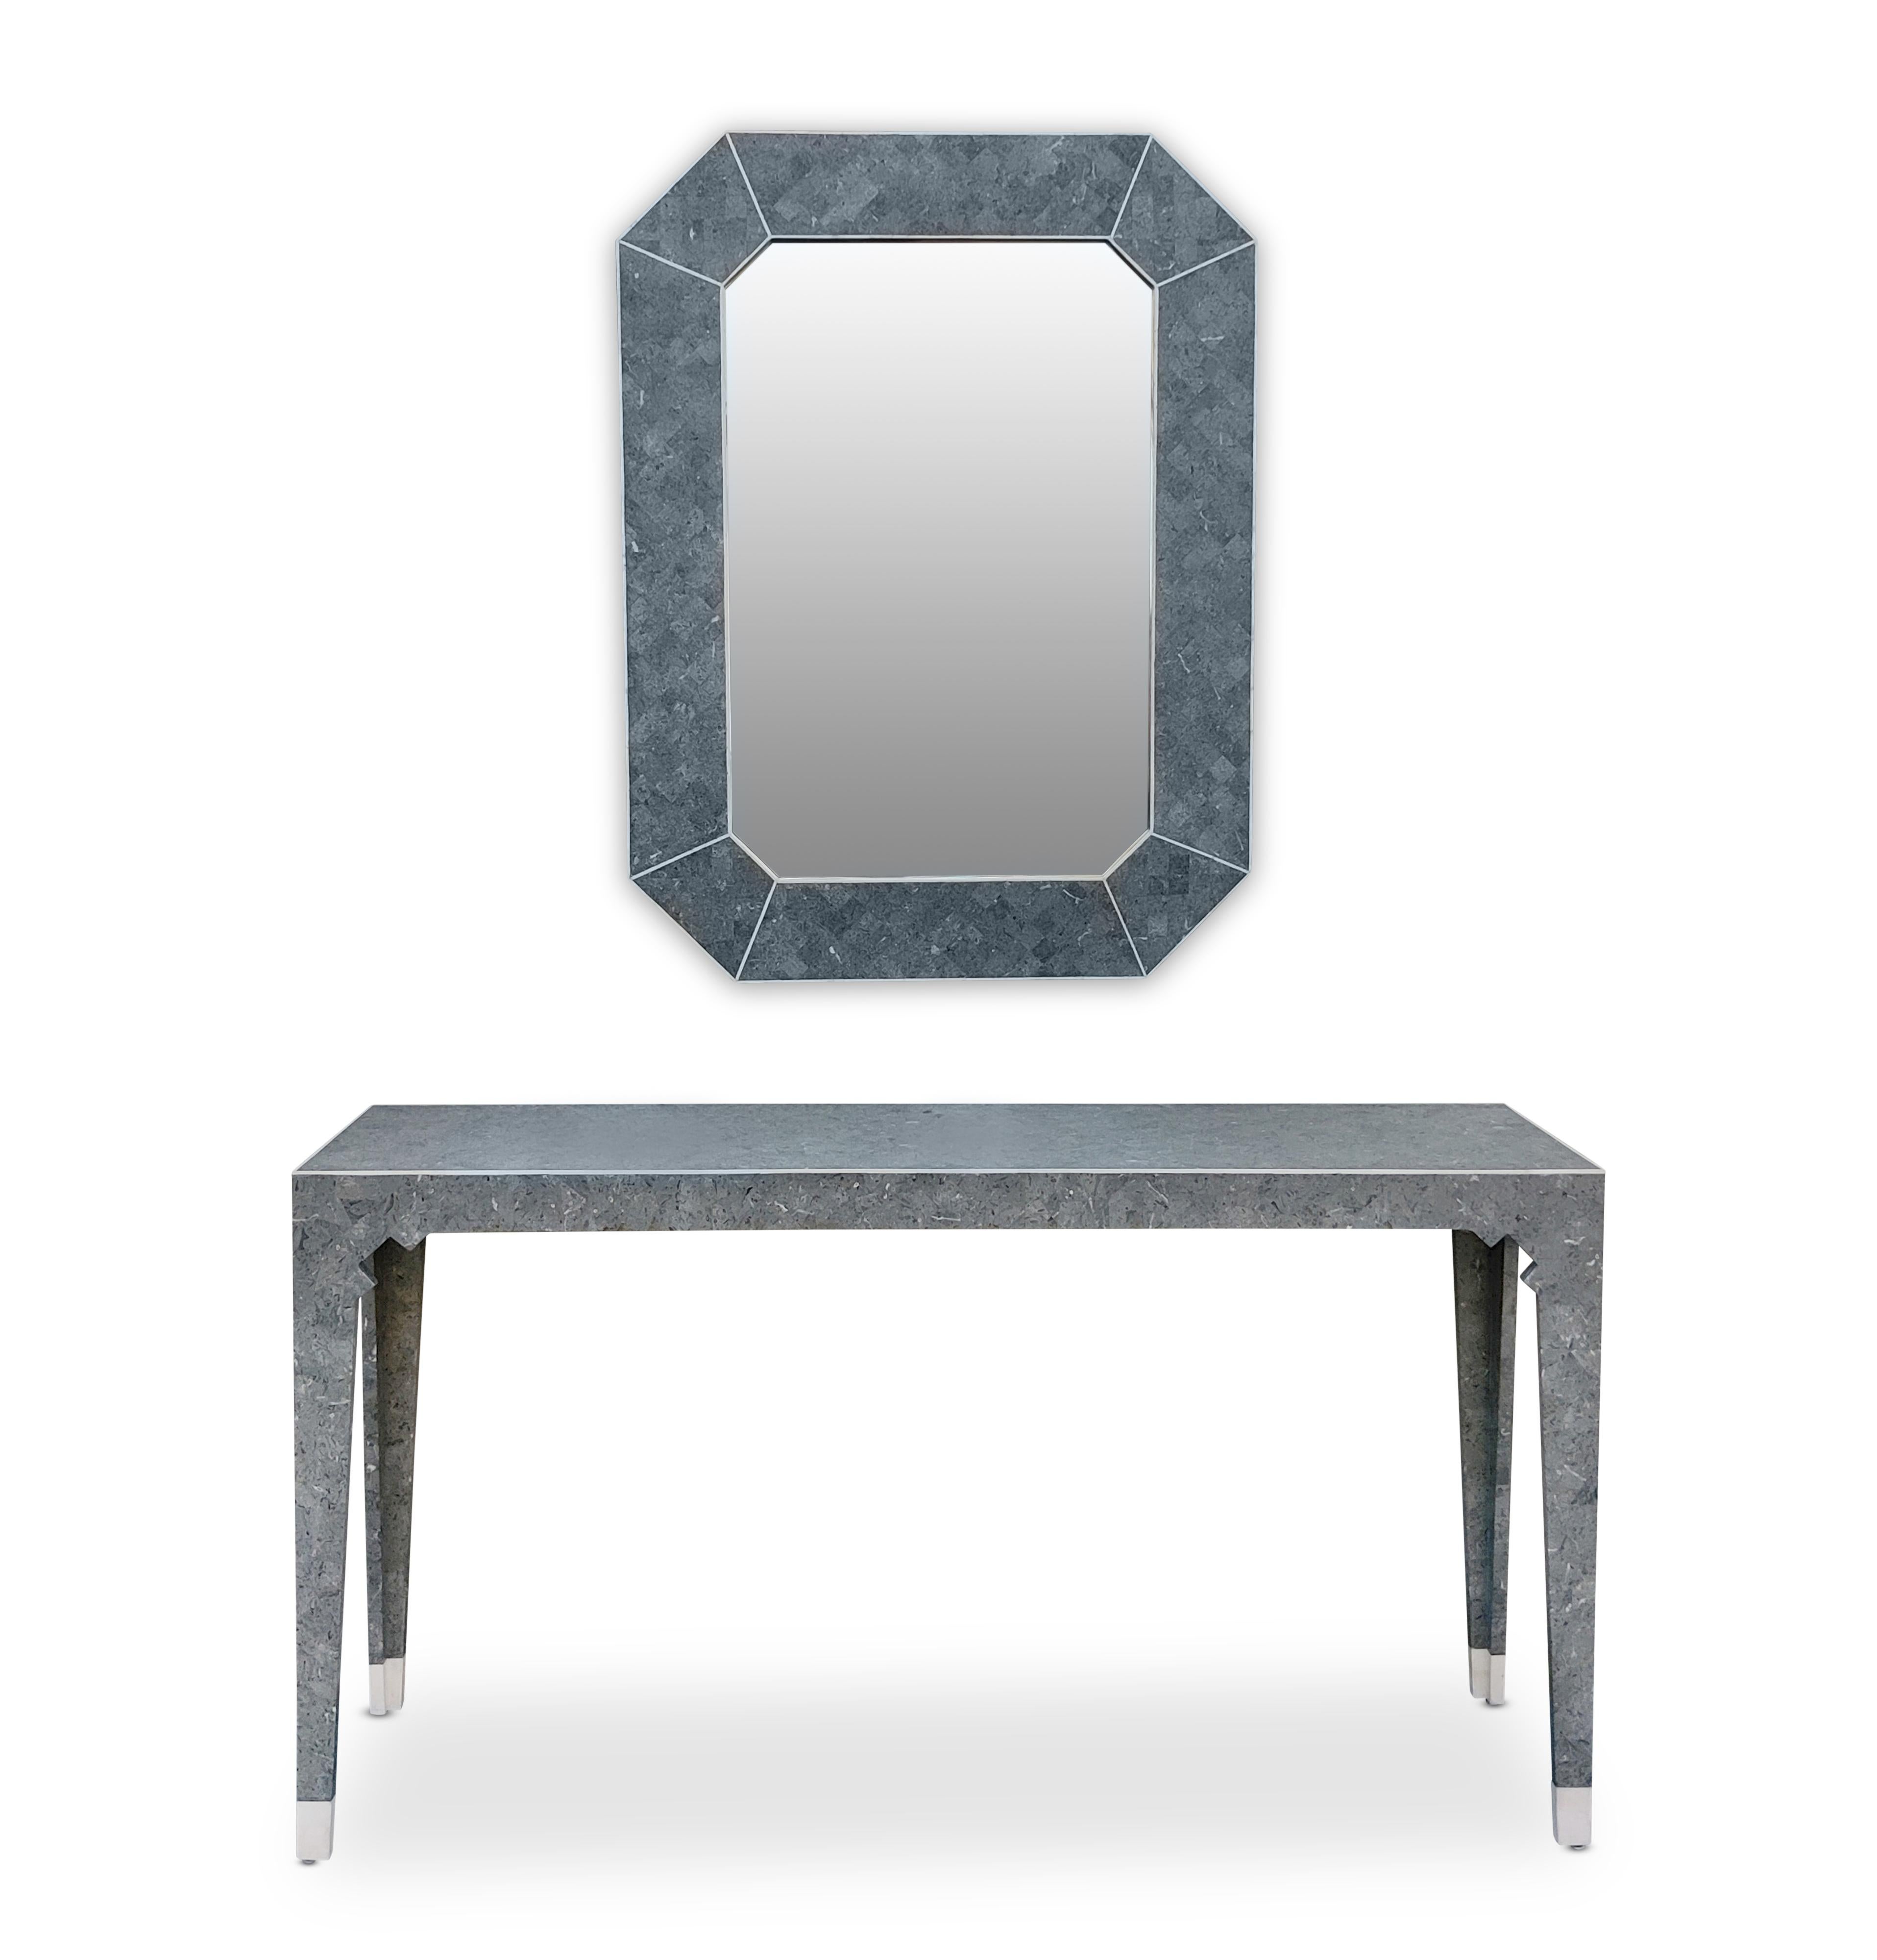 A very elegant post-modern Oggetti wall mirror and narrow console table. Similar to Maitland Smith tessellated mirror+console sets, this set was made in the late 80s or early 90s. Notice the trim styling that includes an angled mirror frame and